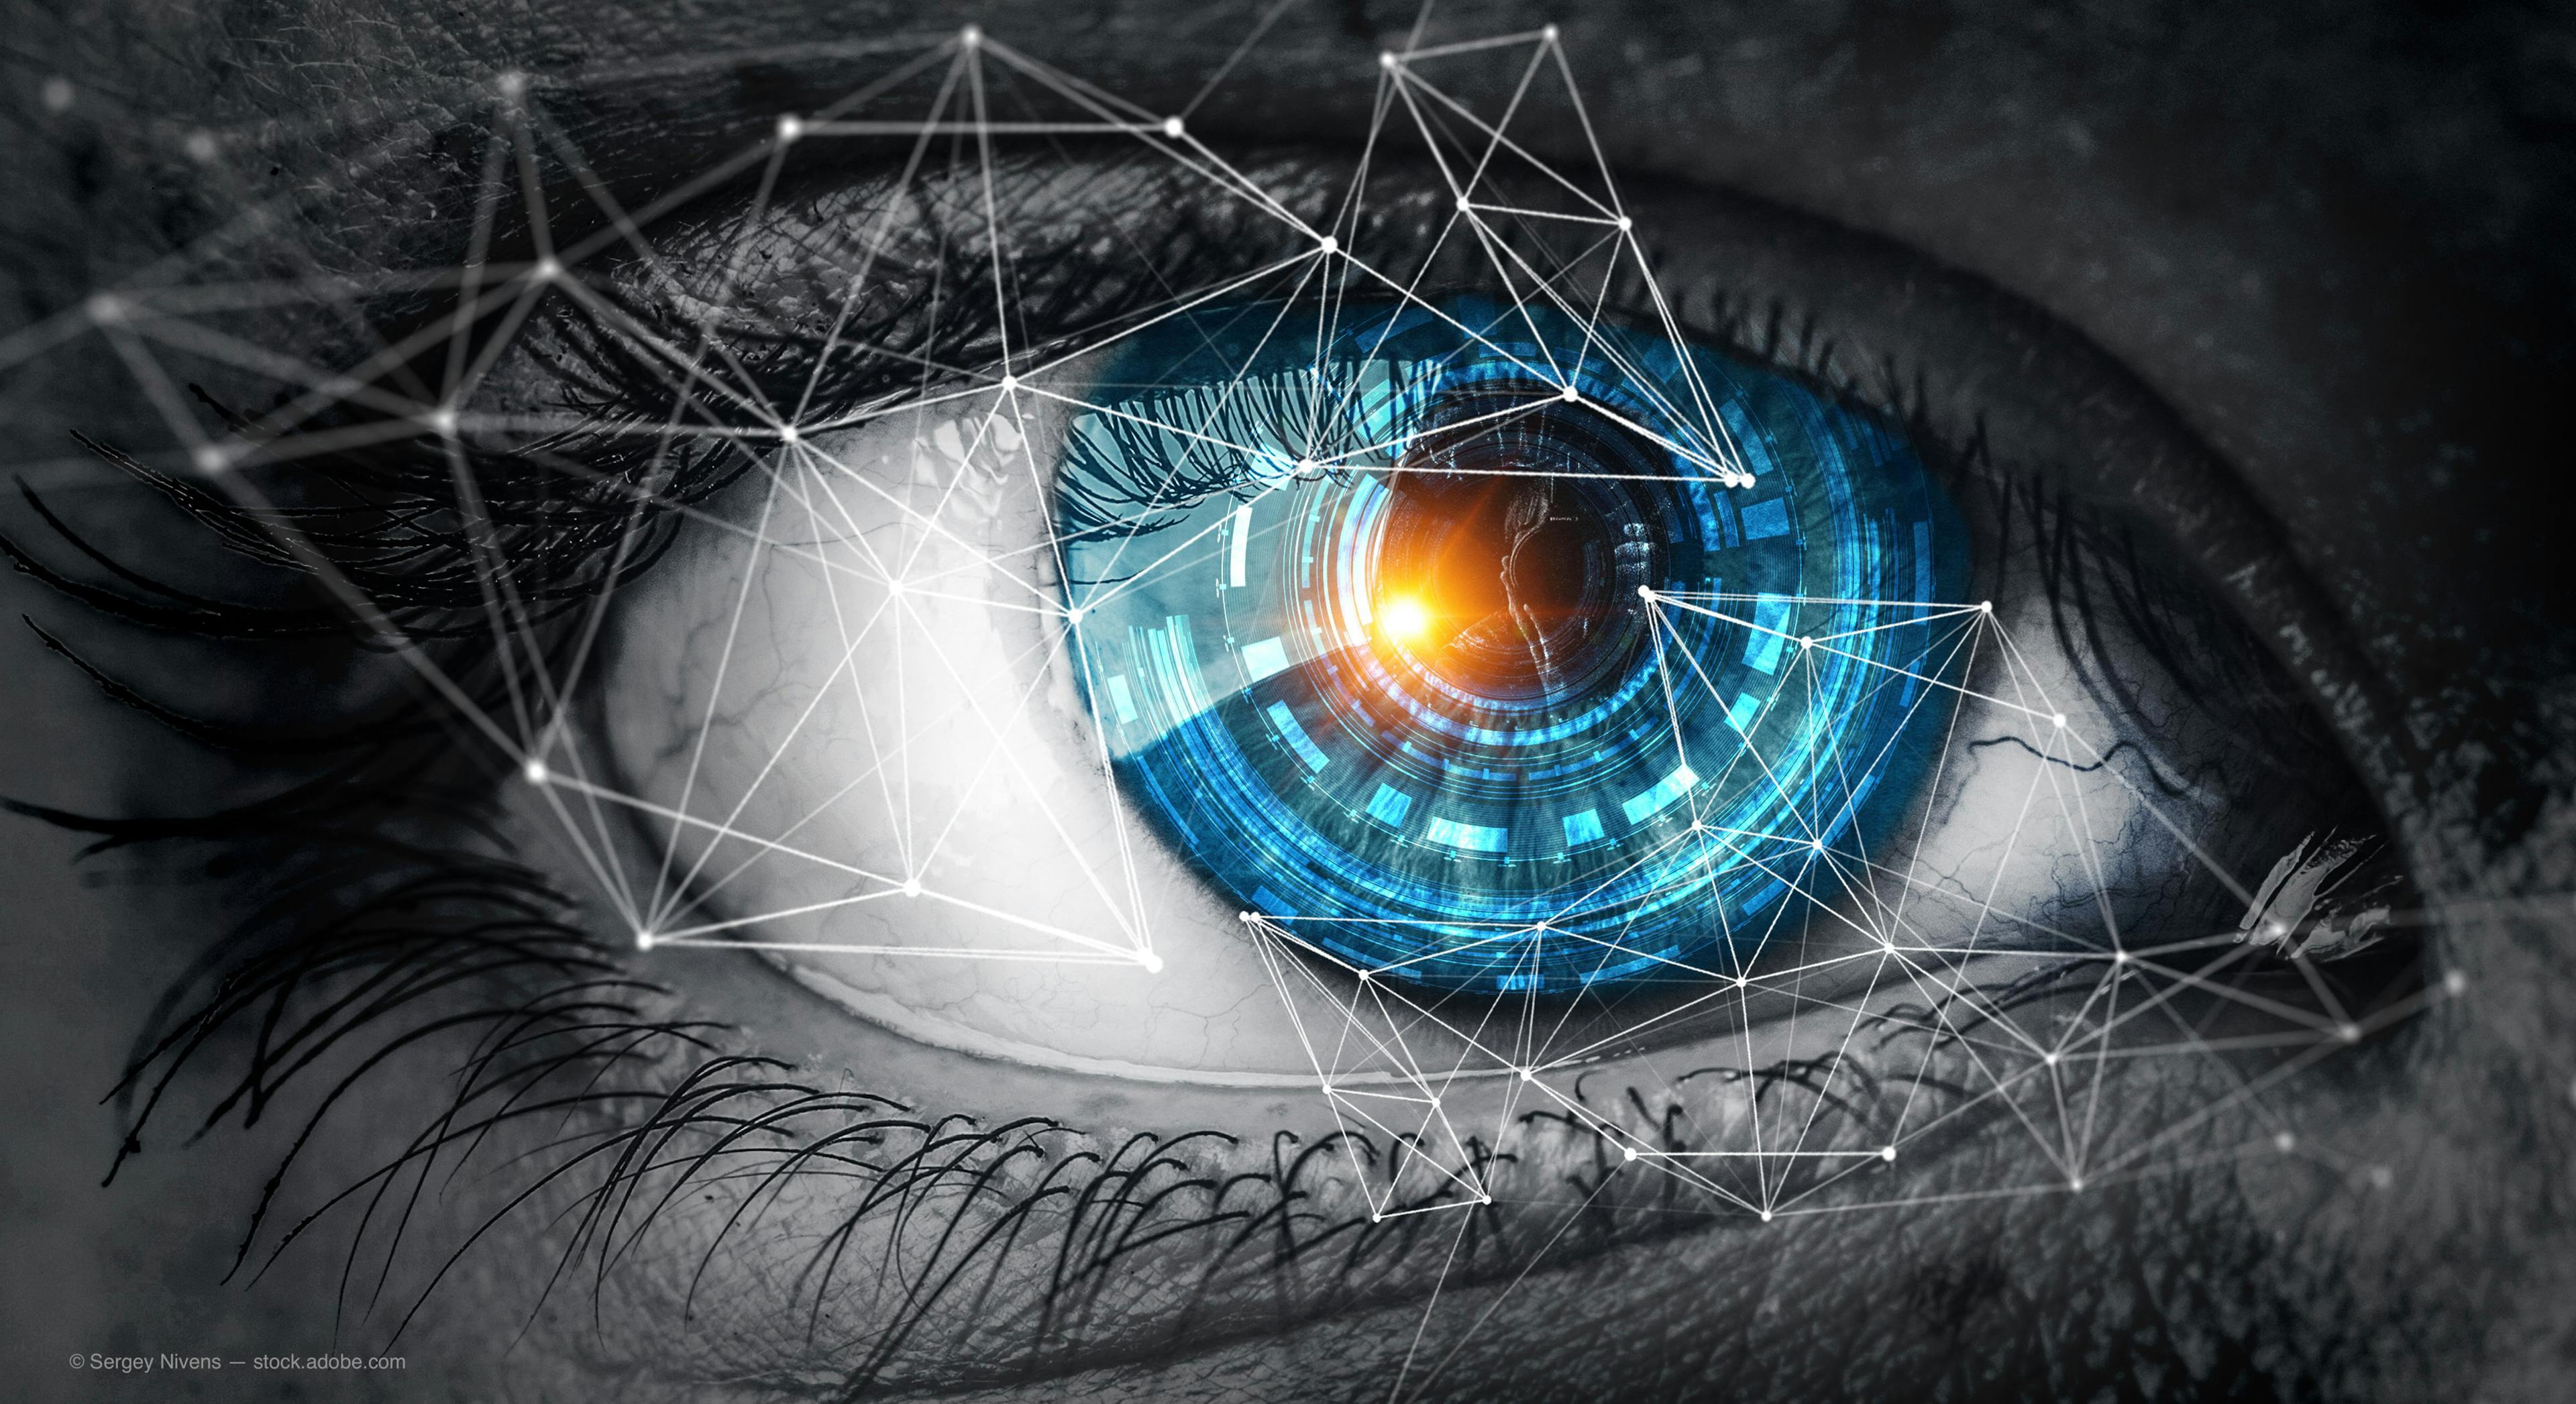   Investigators from the Sun Yay-Sen University in Guangzhou have created a theranostic device that targets sensing rising fluid pressures within the eye to automatically deliver medication for a glaucoma patient.